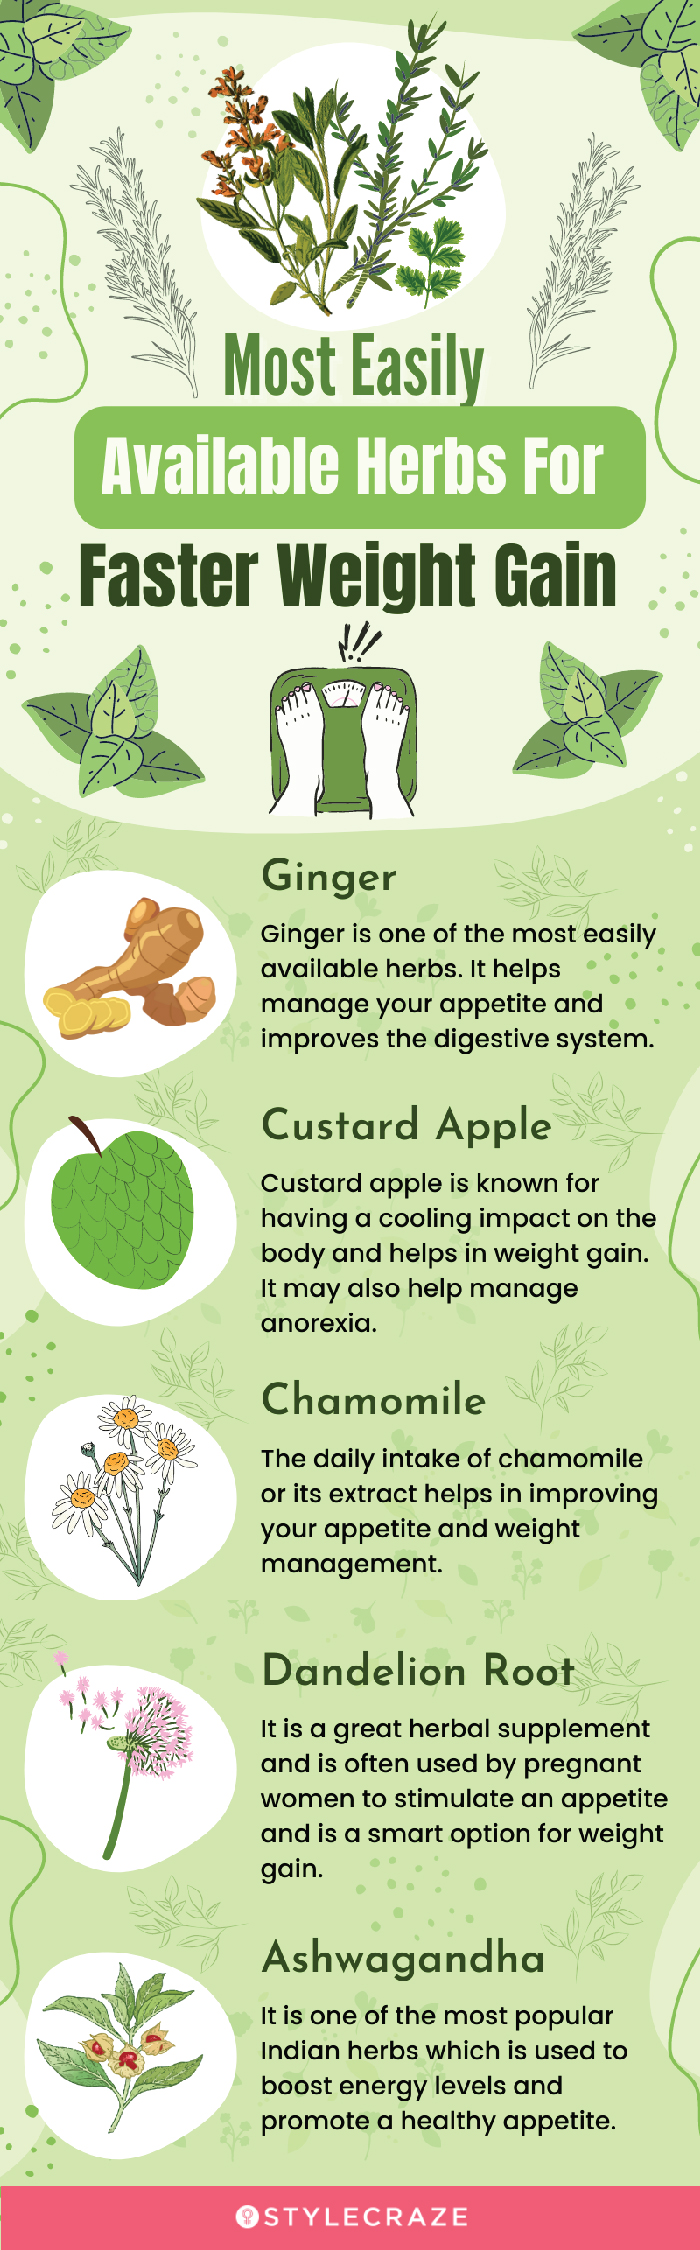 most easily available herbs for faster weight gain [infographic]